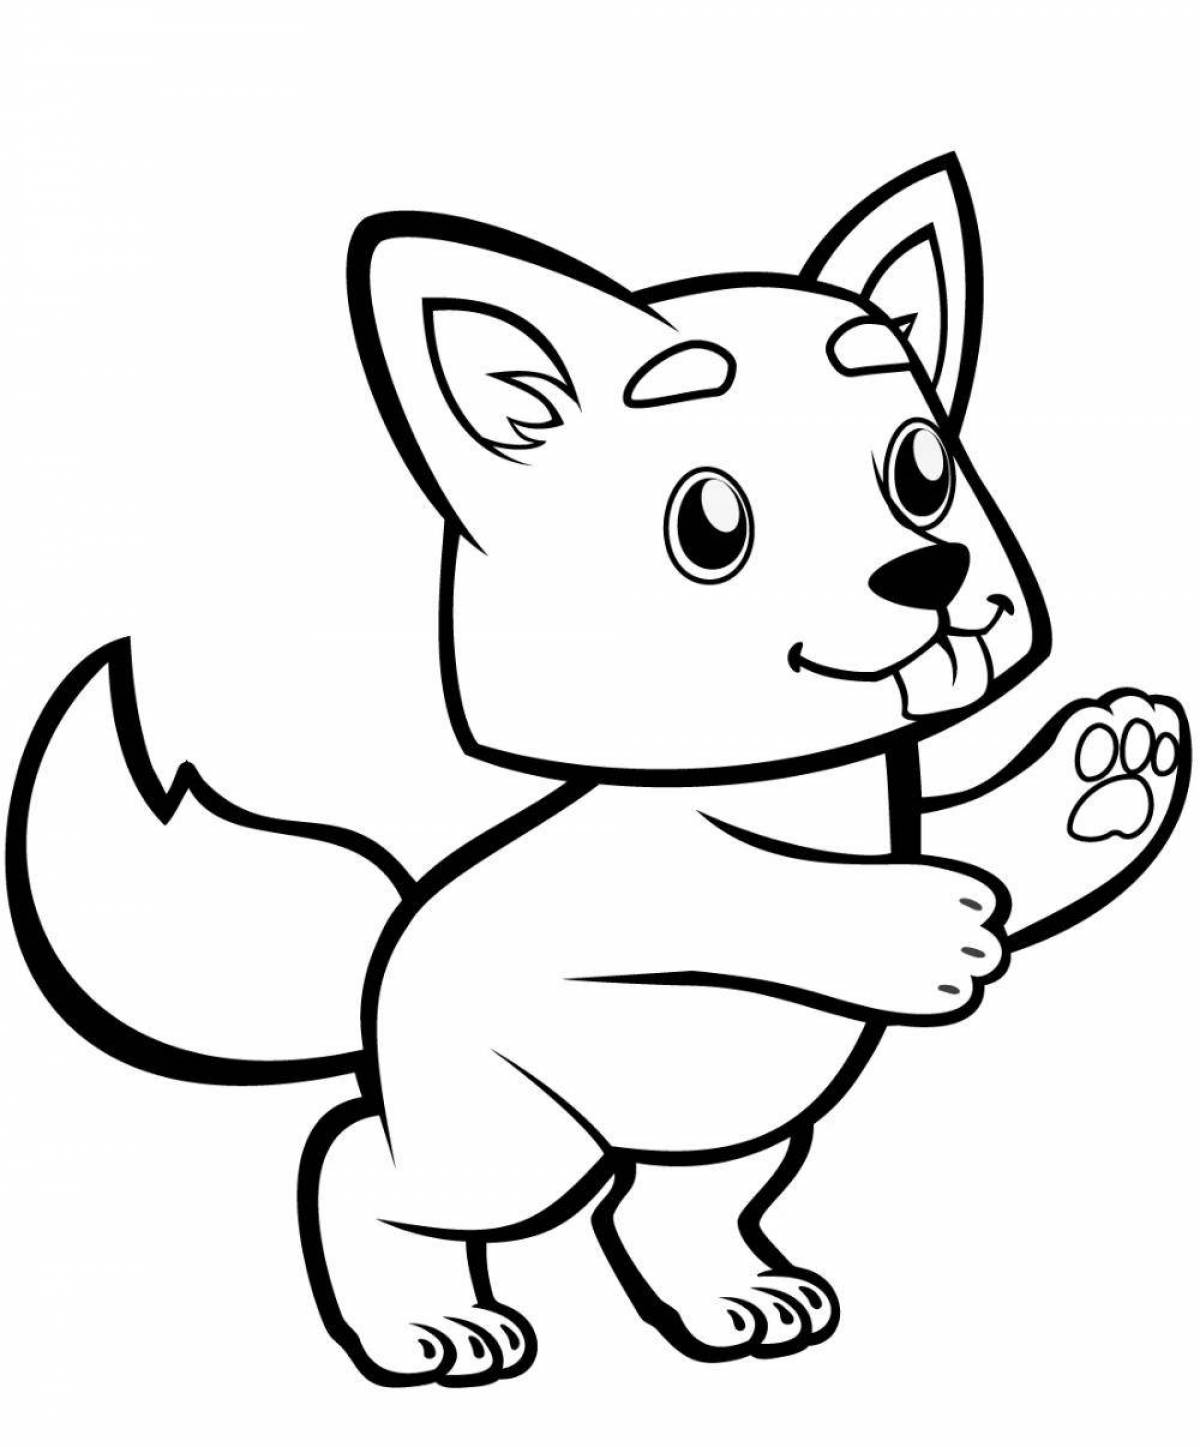 Whimsical fox coloring book for 3-4 year olds